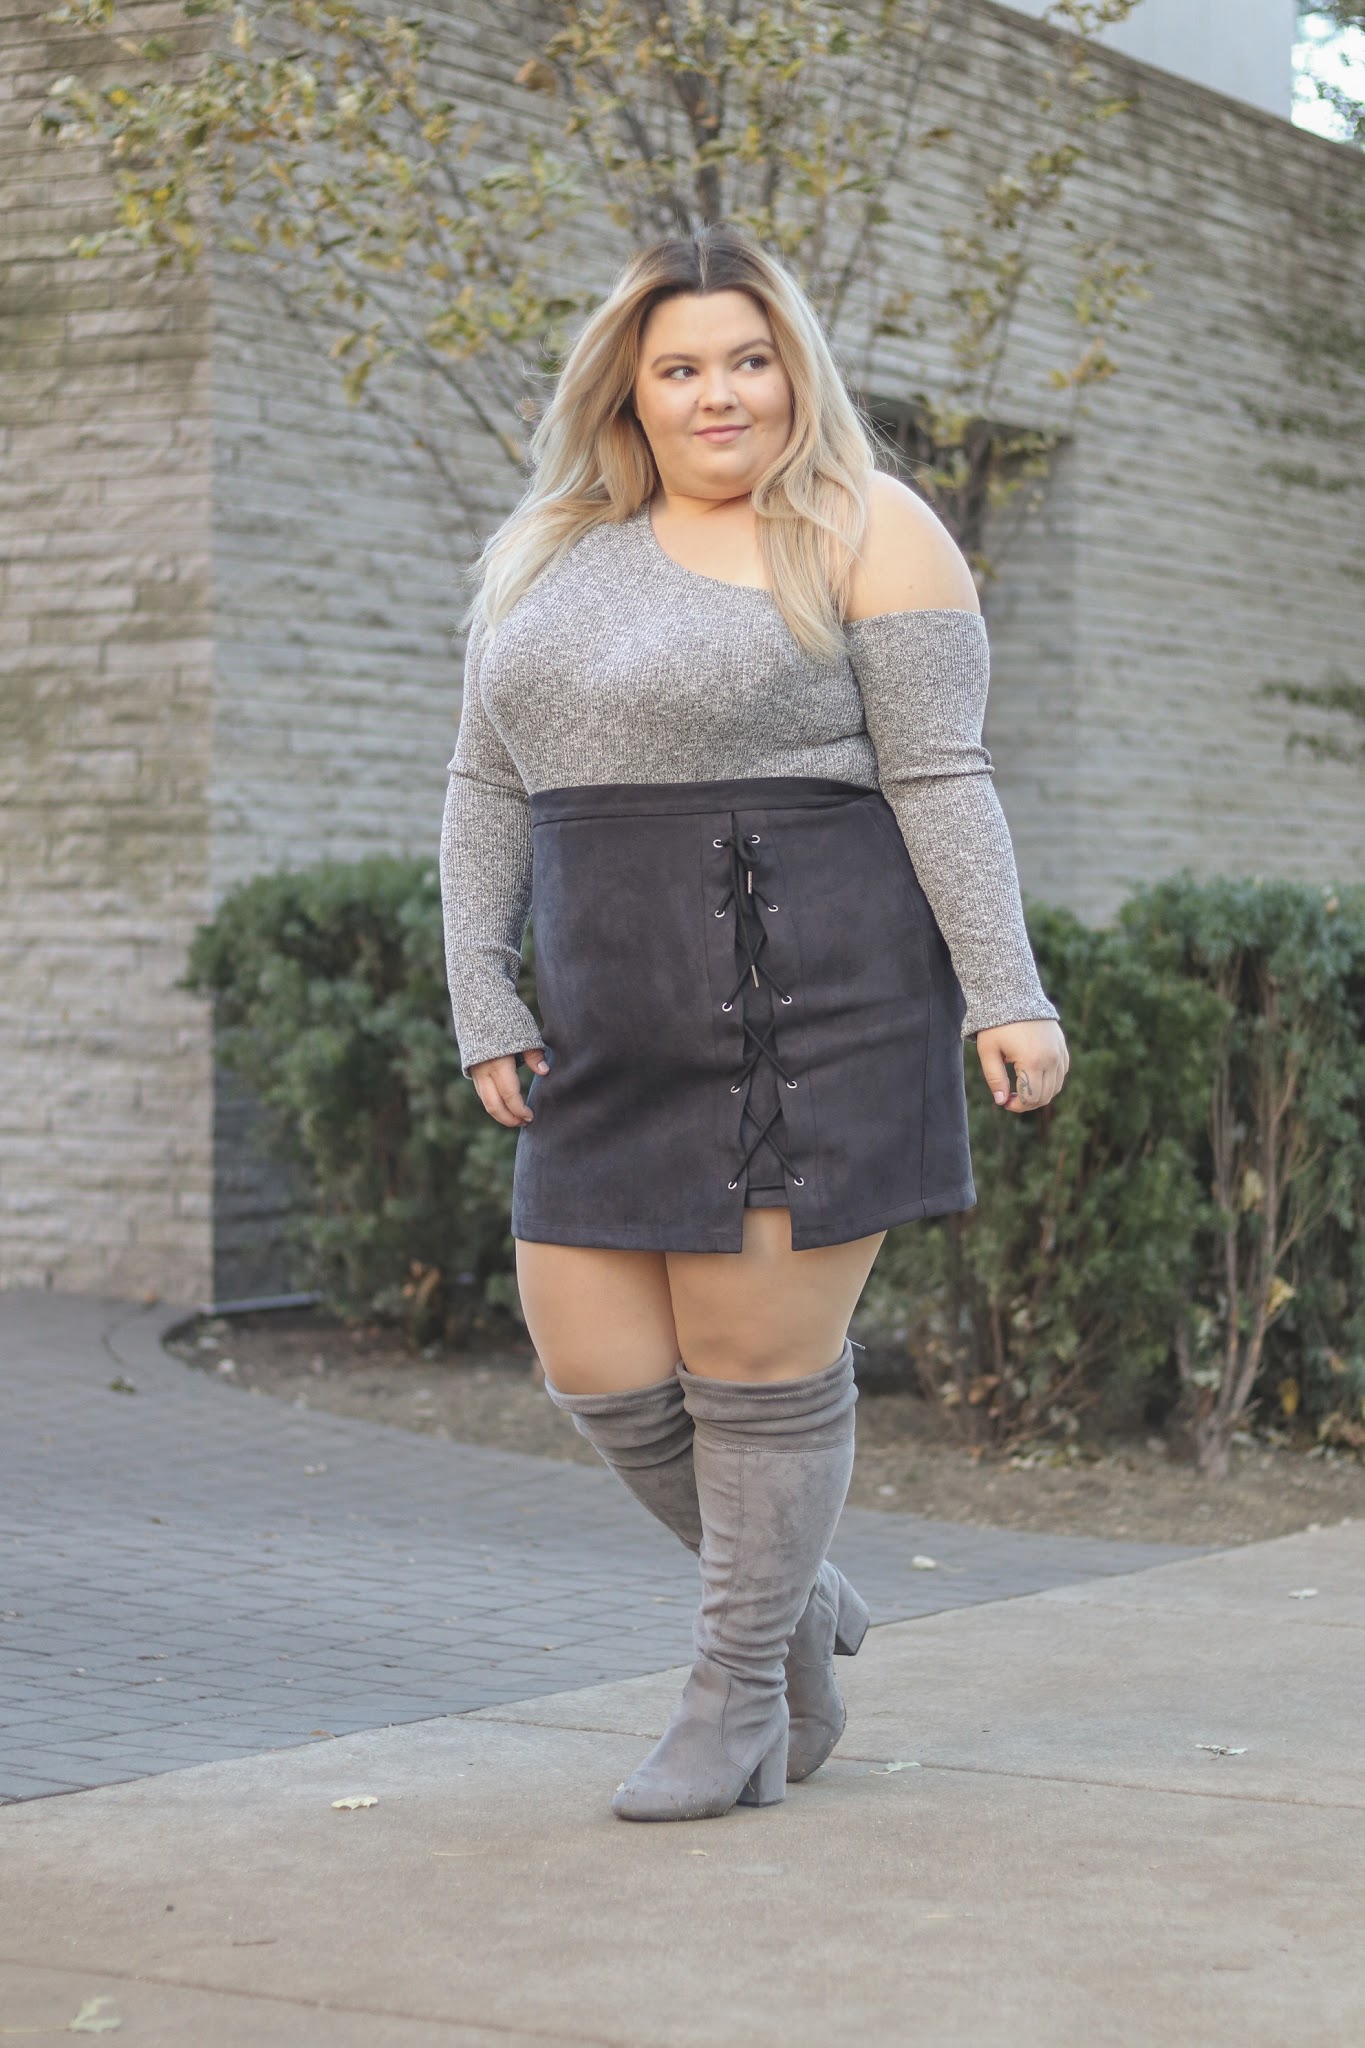 Chicago Plus Size Fashion Blogger Natalie Craig reviews gray suede over the knee boots.